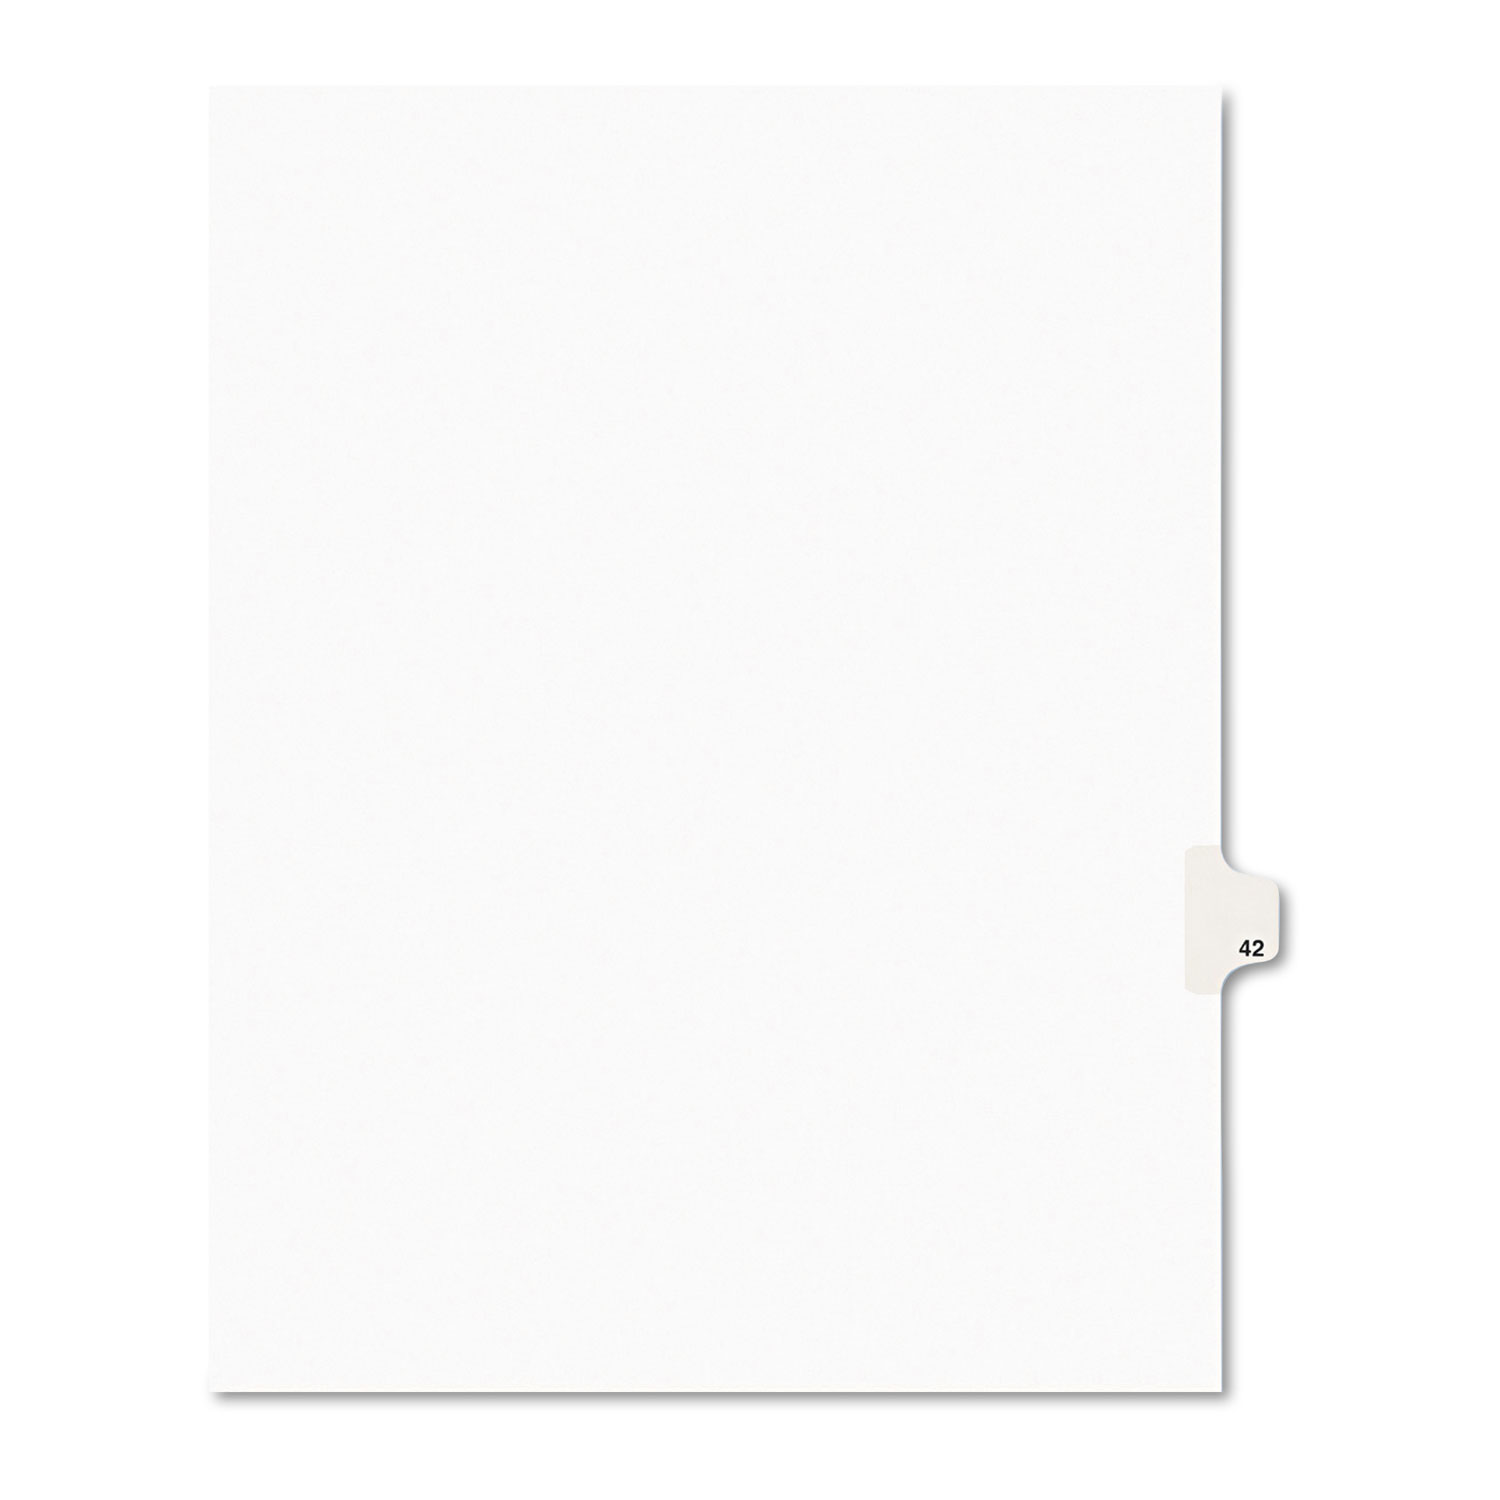  Avery 01042 Preprinted Legal Exhibit Side Tab Index Dividers, Avery Style, 10-Tab, 42, 11 x 8.5, White, 25/Pack (AVE01042) 